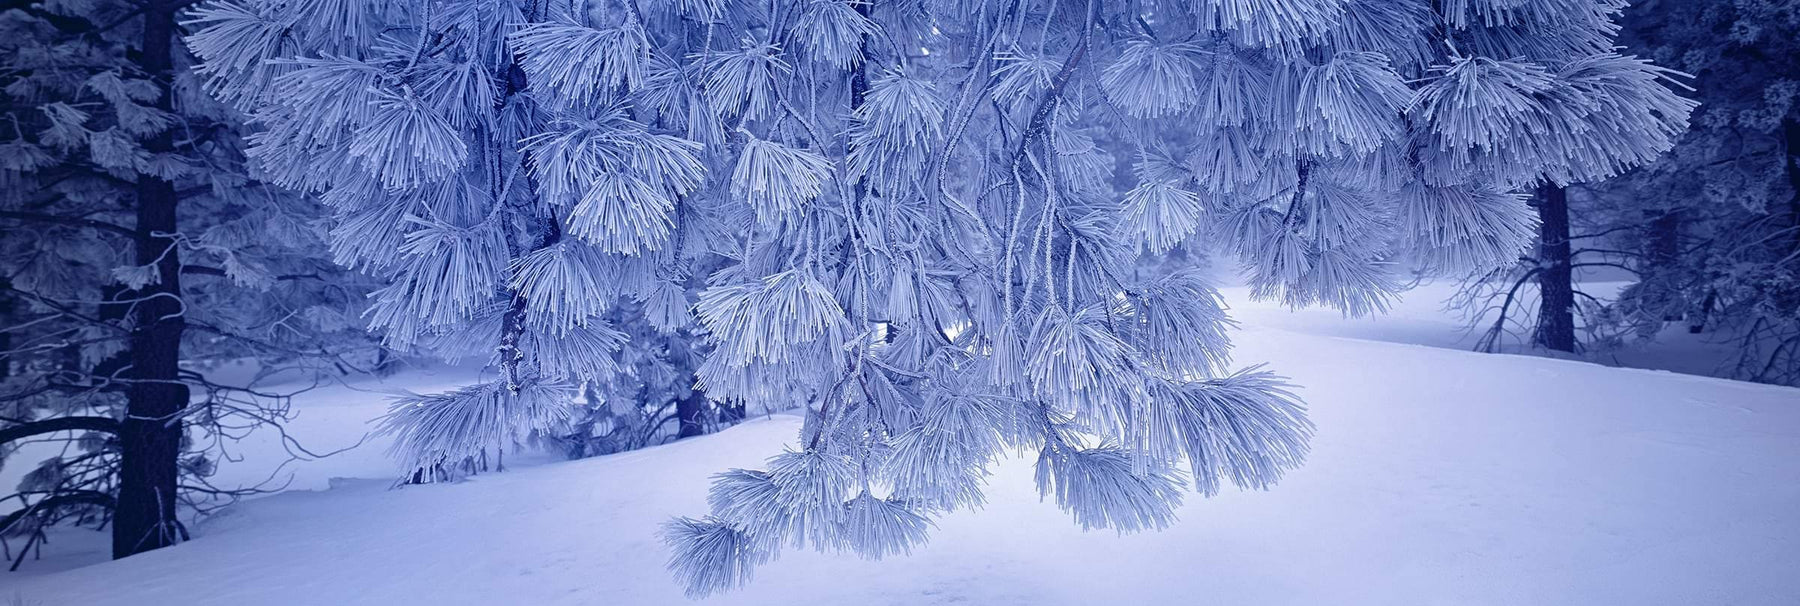 Frost covered branch of pine needles reaching over the snow covered forest floor at Mount Pinos California